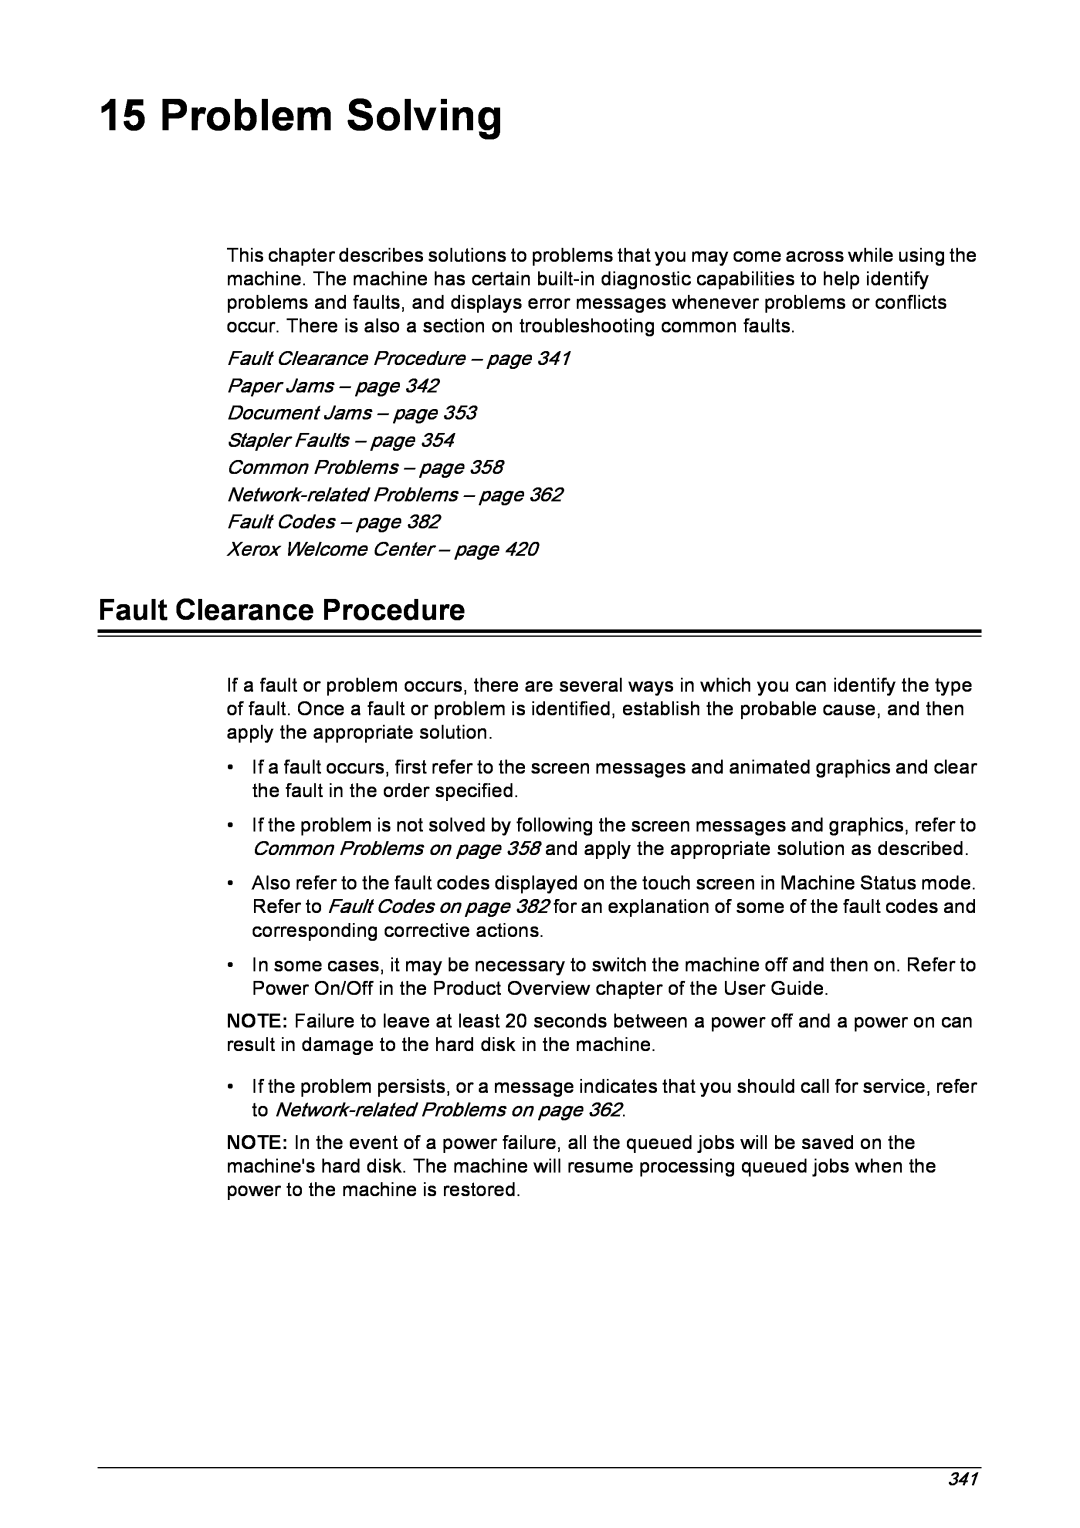 Xerox 5222 manual Problem Solving, Fault Clearance Procedure – page, Paper Jams – page Document Jams – page 